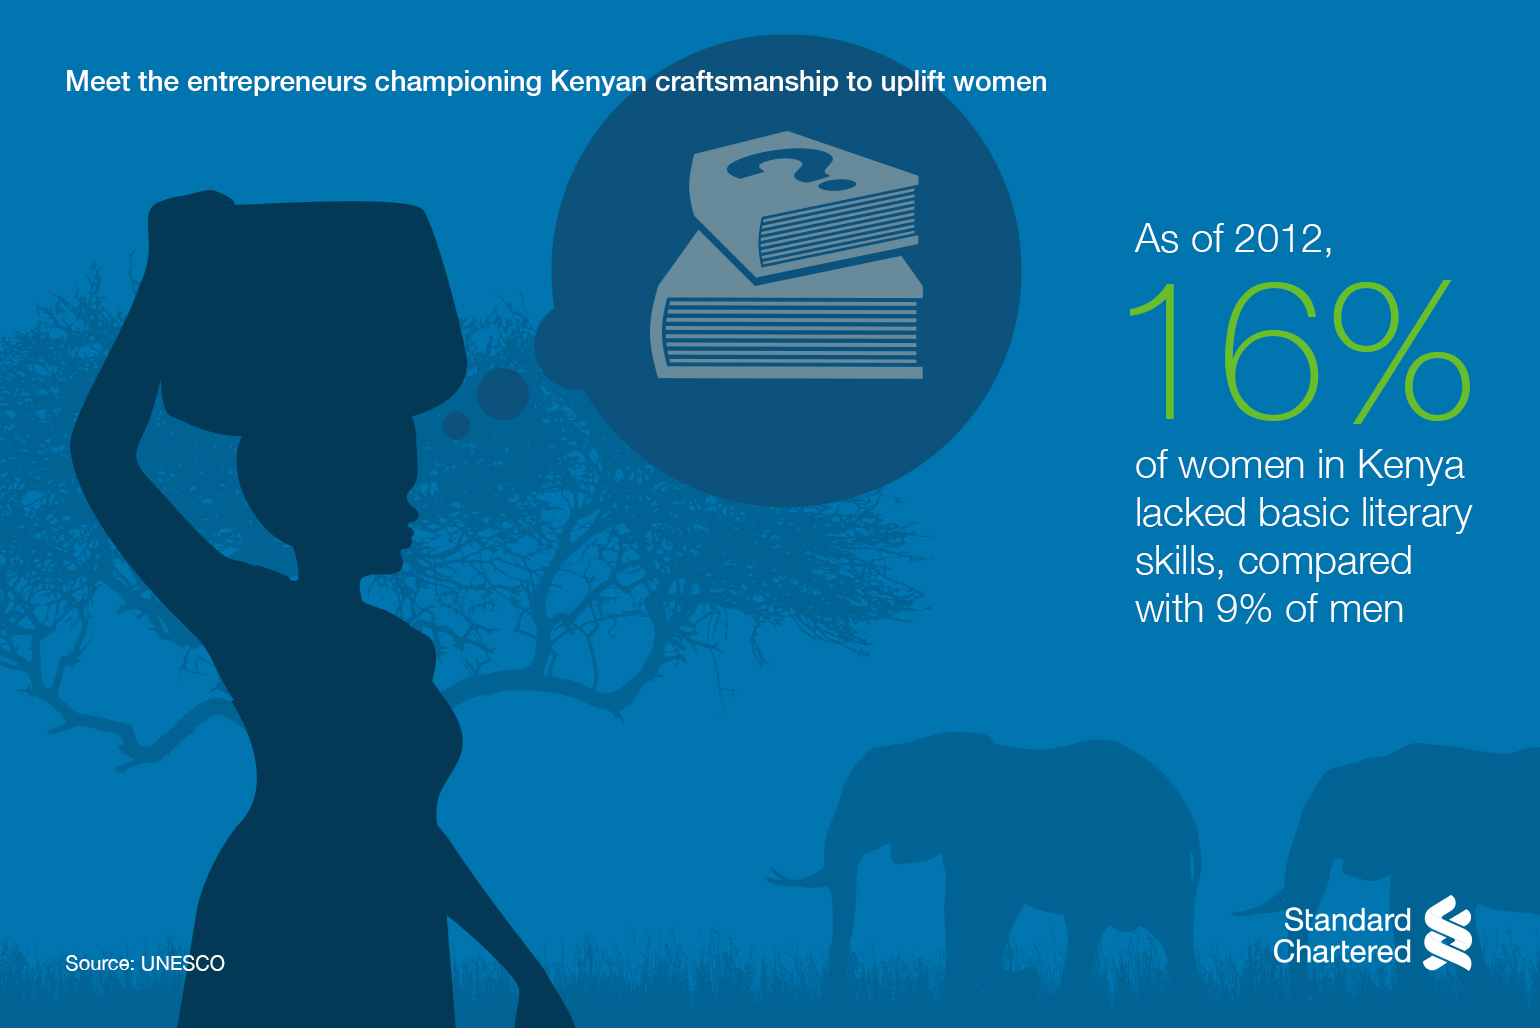 As of 2012, 16% of women in Kenya lacked basic literary skills, compared with 9% of men